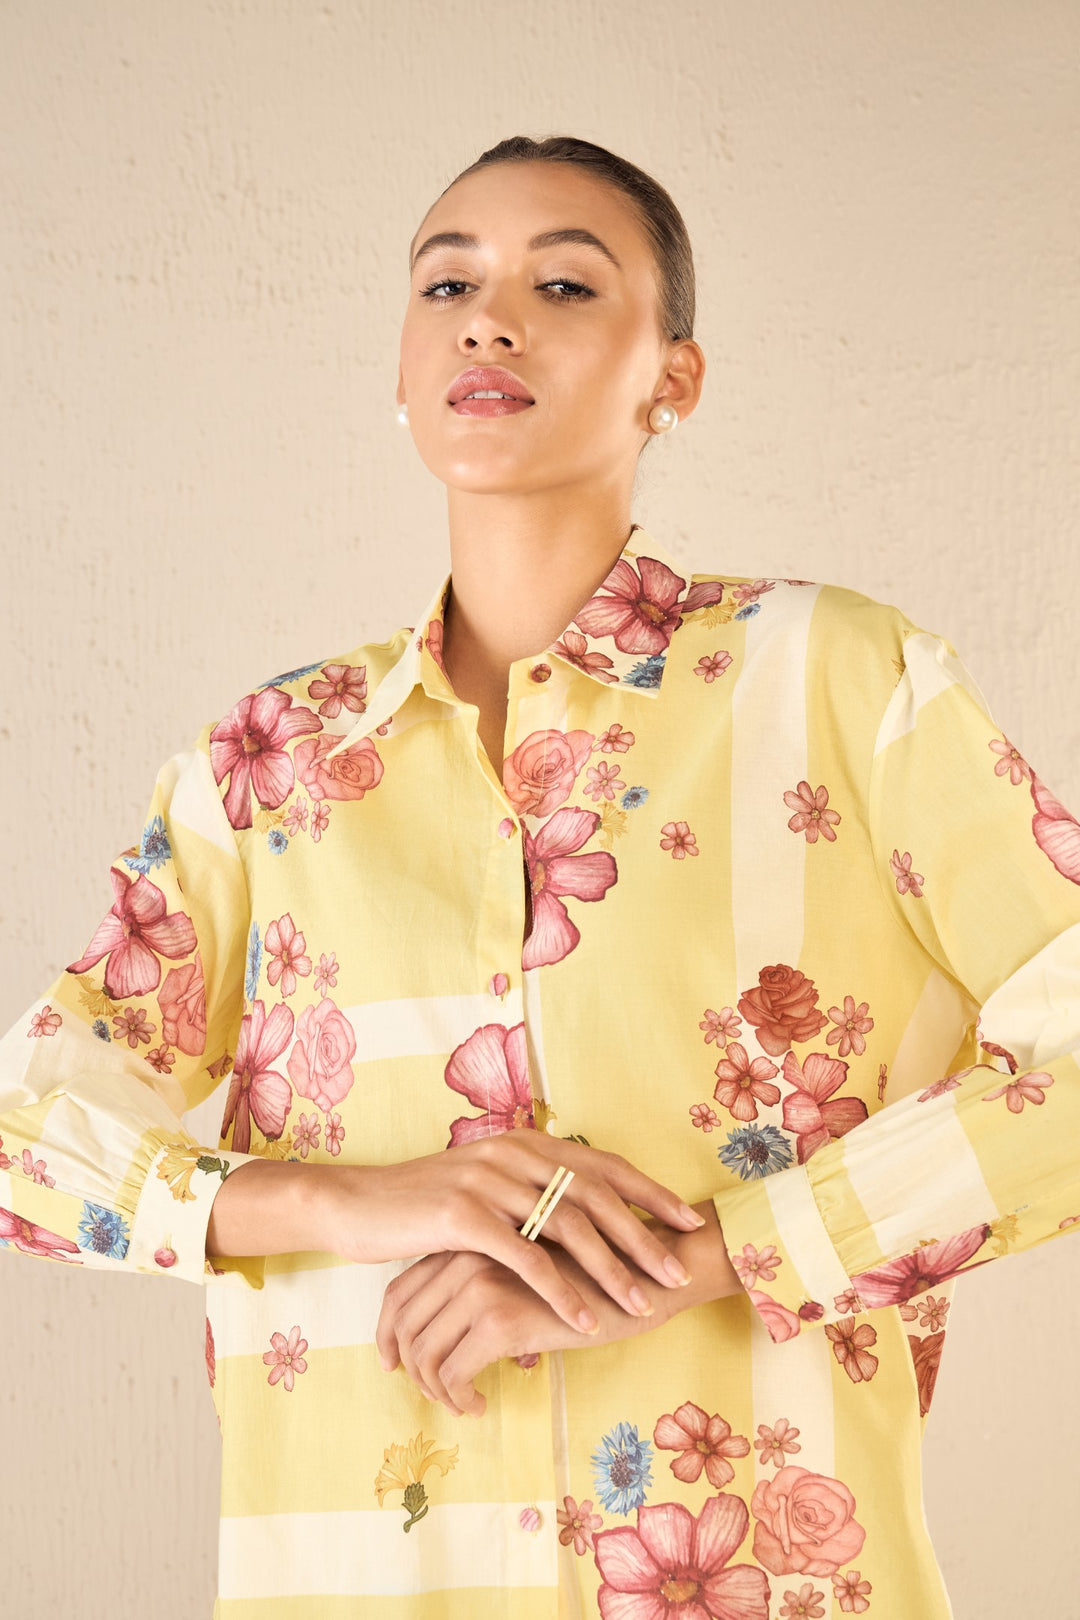 FLORAL FUSION: YELLOW & WHITE STRIPE FLORAL SHIRT WITH IVORY FLAIR PANTS